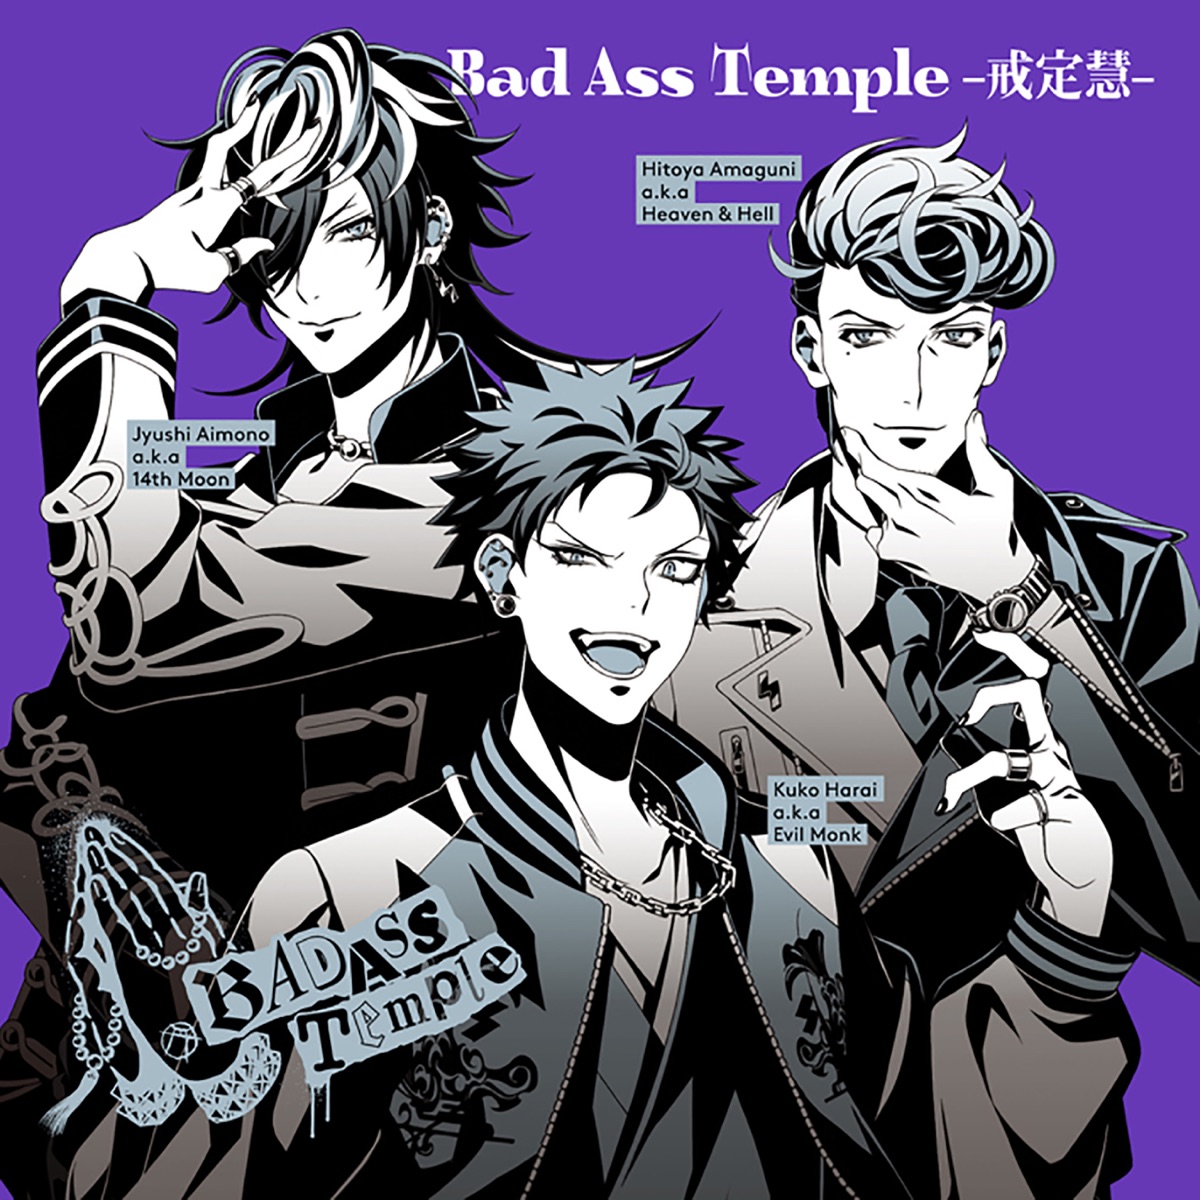 Cover art for『Hitoya Amaguni (Eiji Takeuchi) - If I Follow My Heart』from the release『Bad Ass Temple -Kaijoue-』